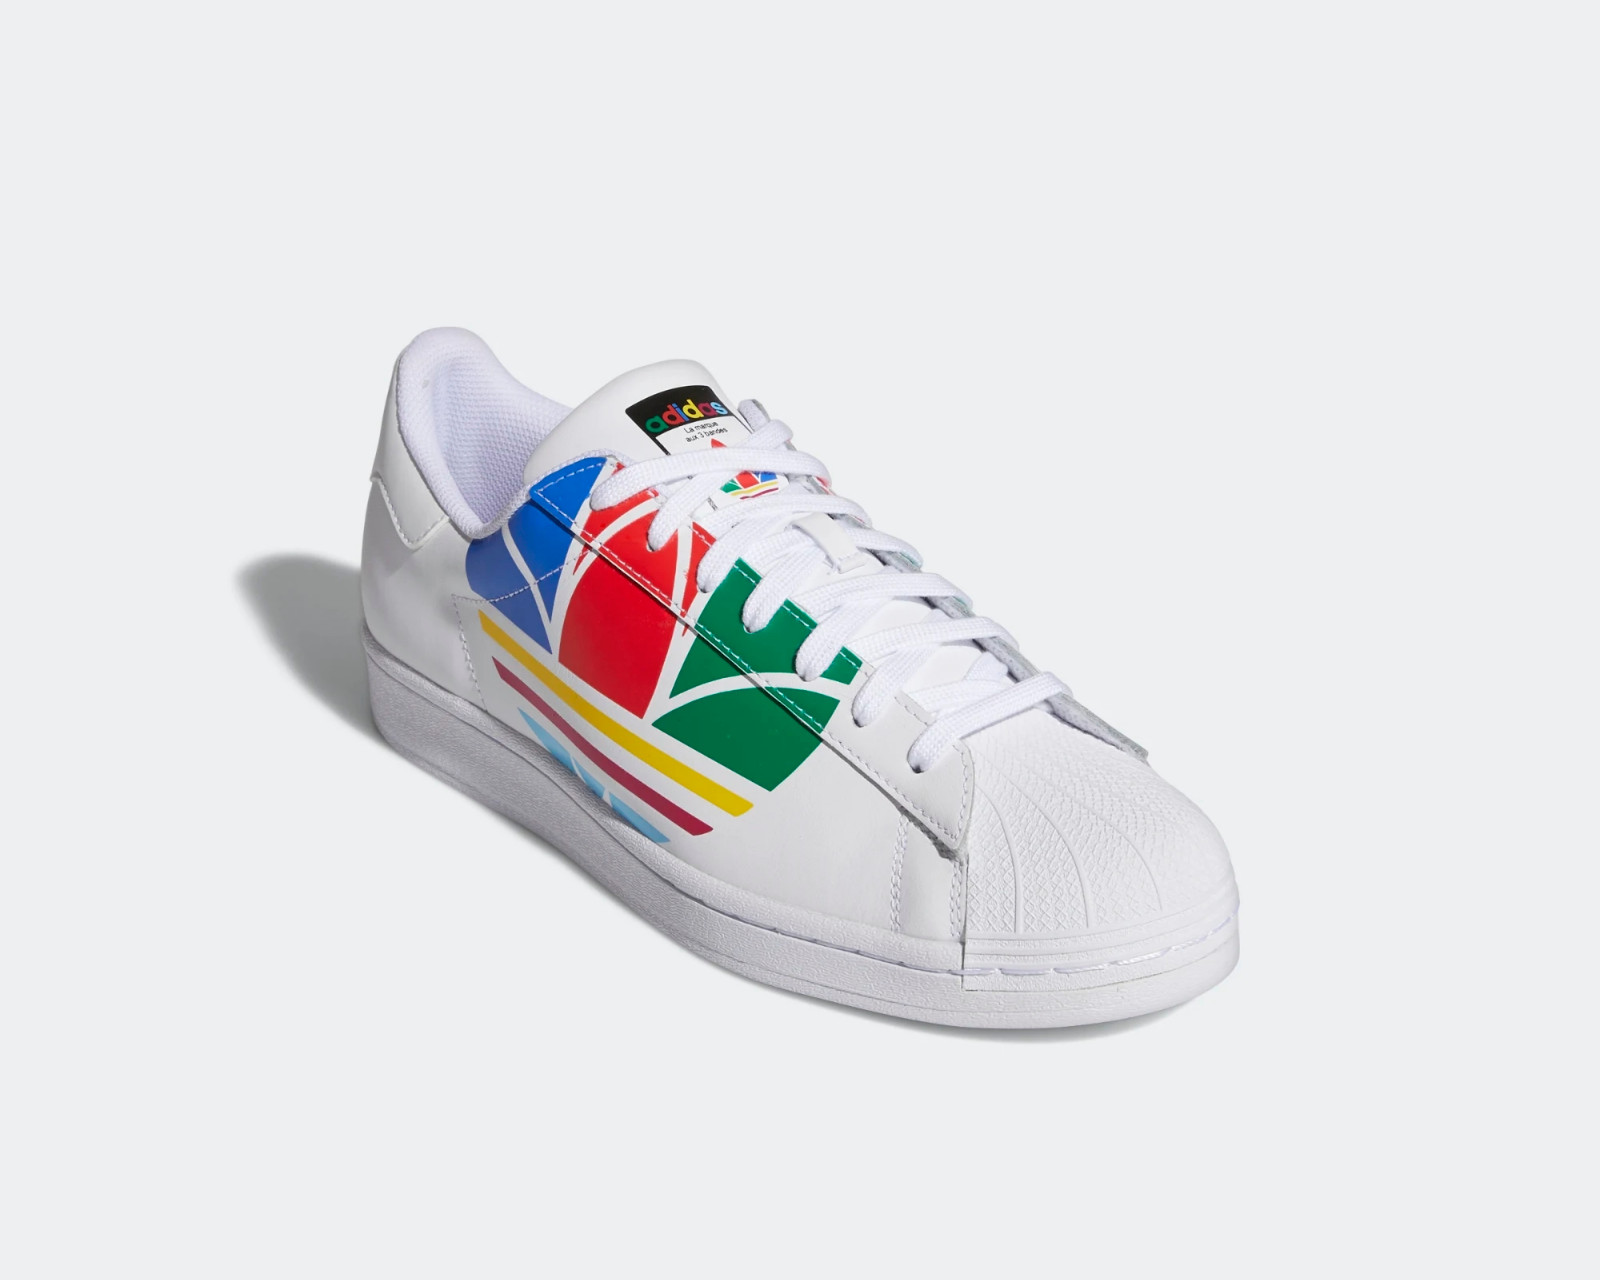 Adidas Superstar Pure Colorful Trefoil Core White Red Blue